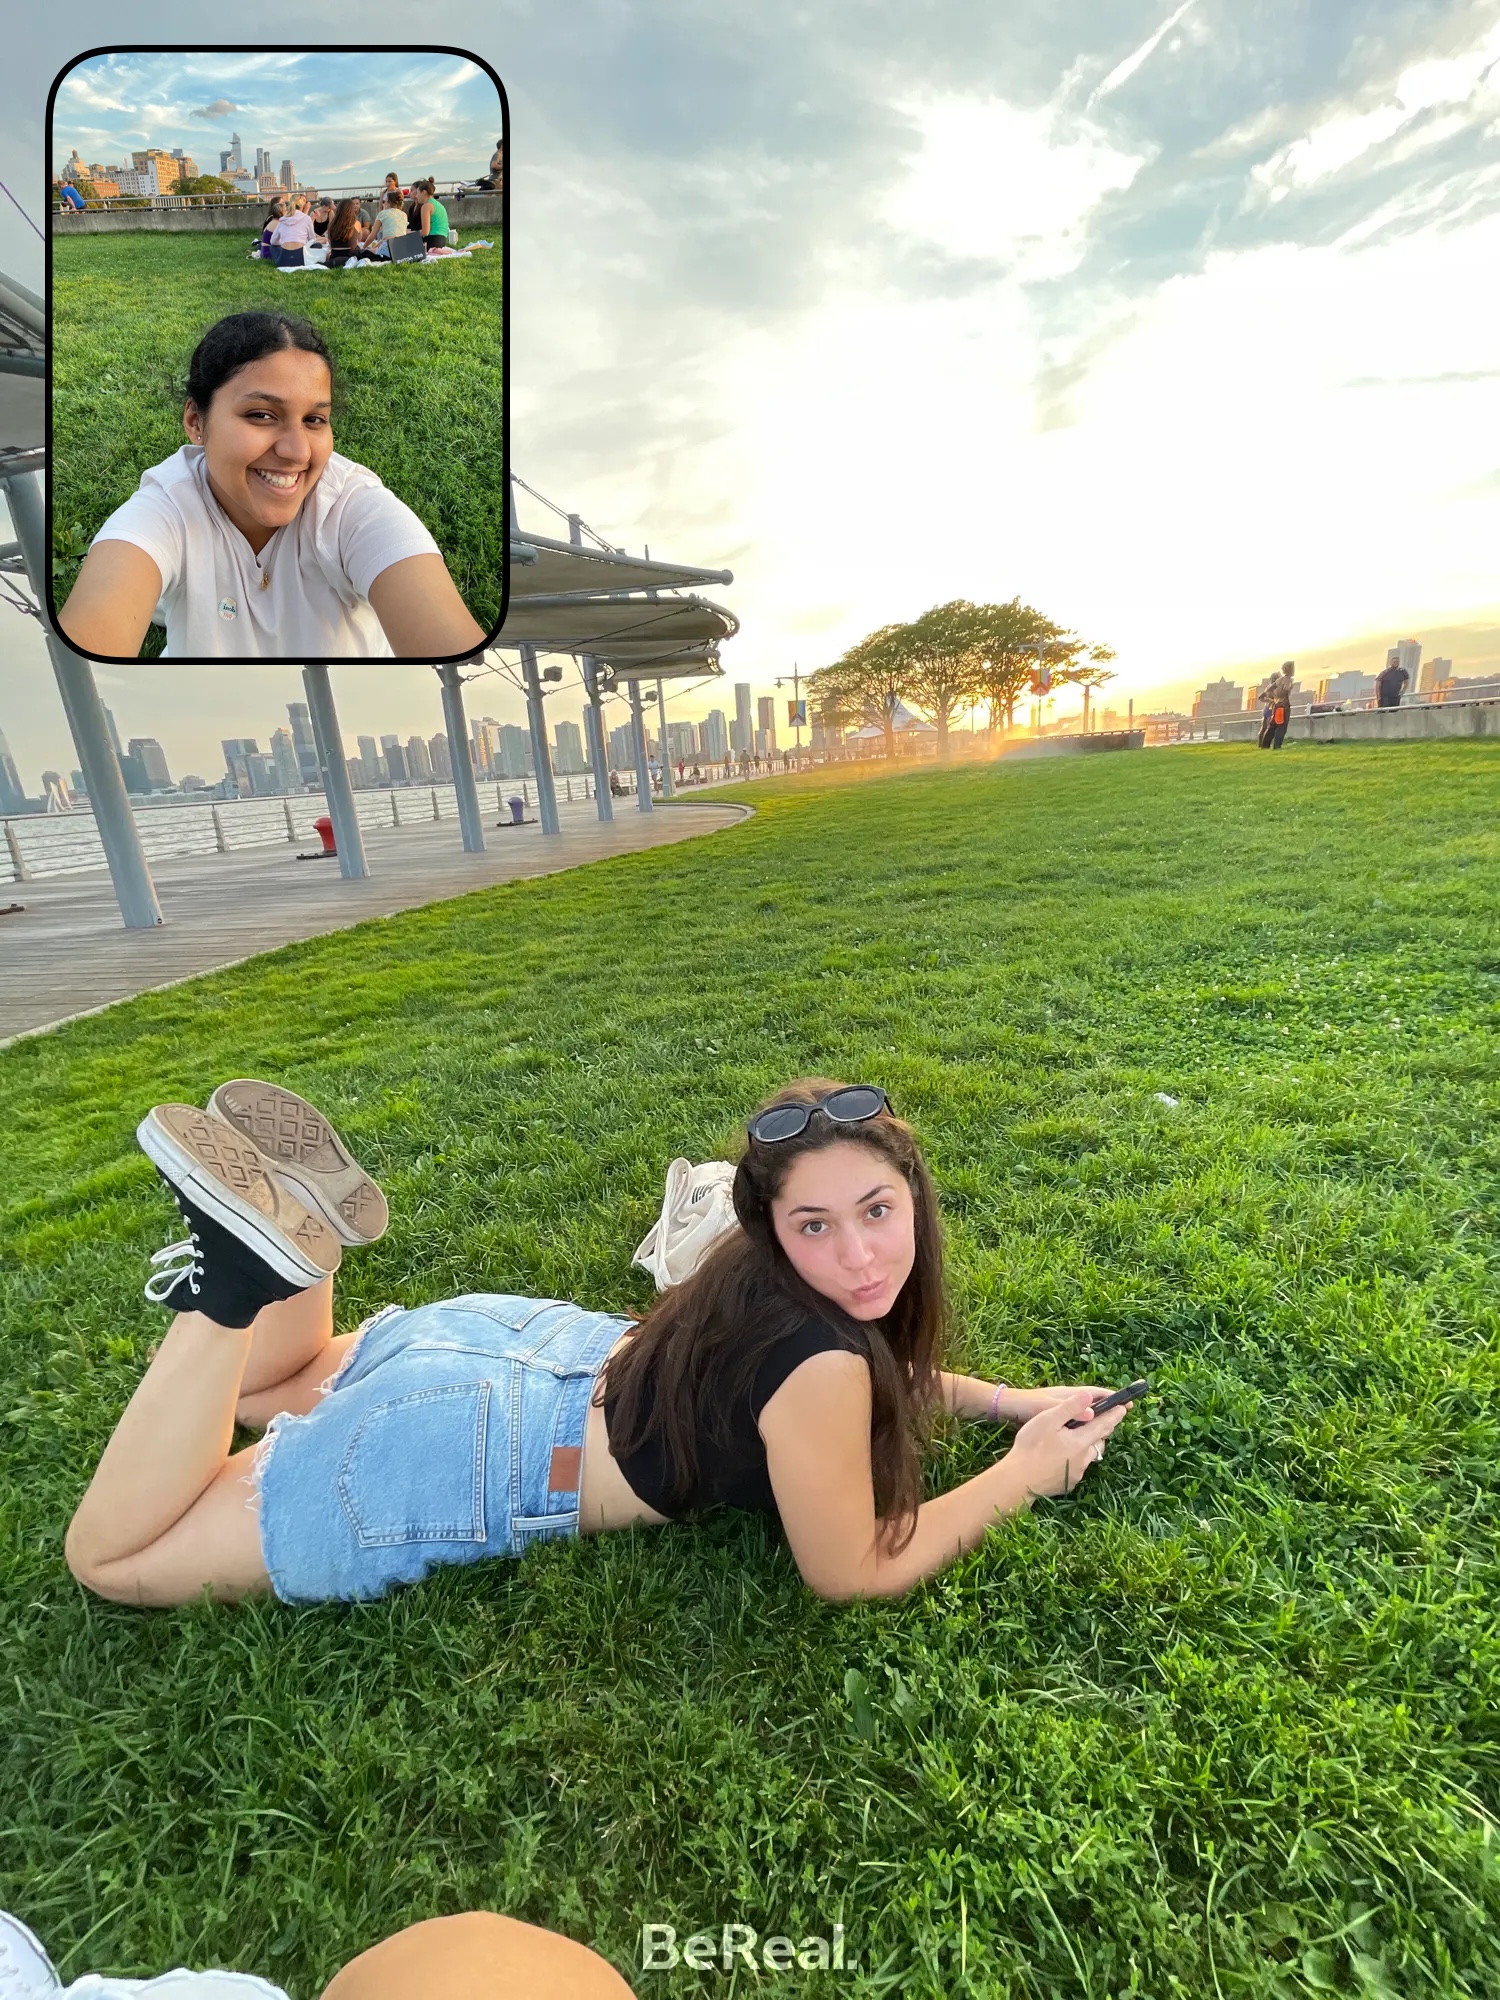 Anjana and her friend are on the grass at the piers